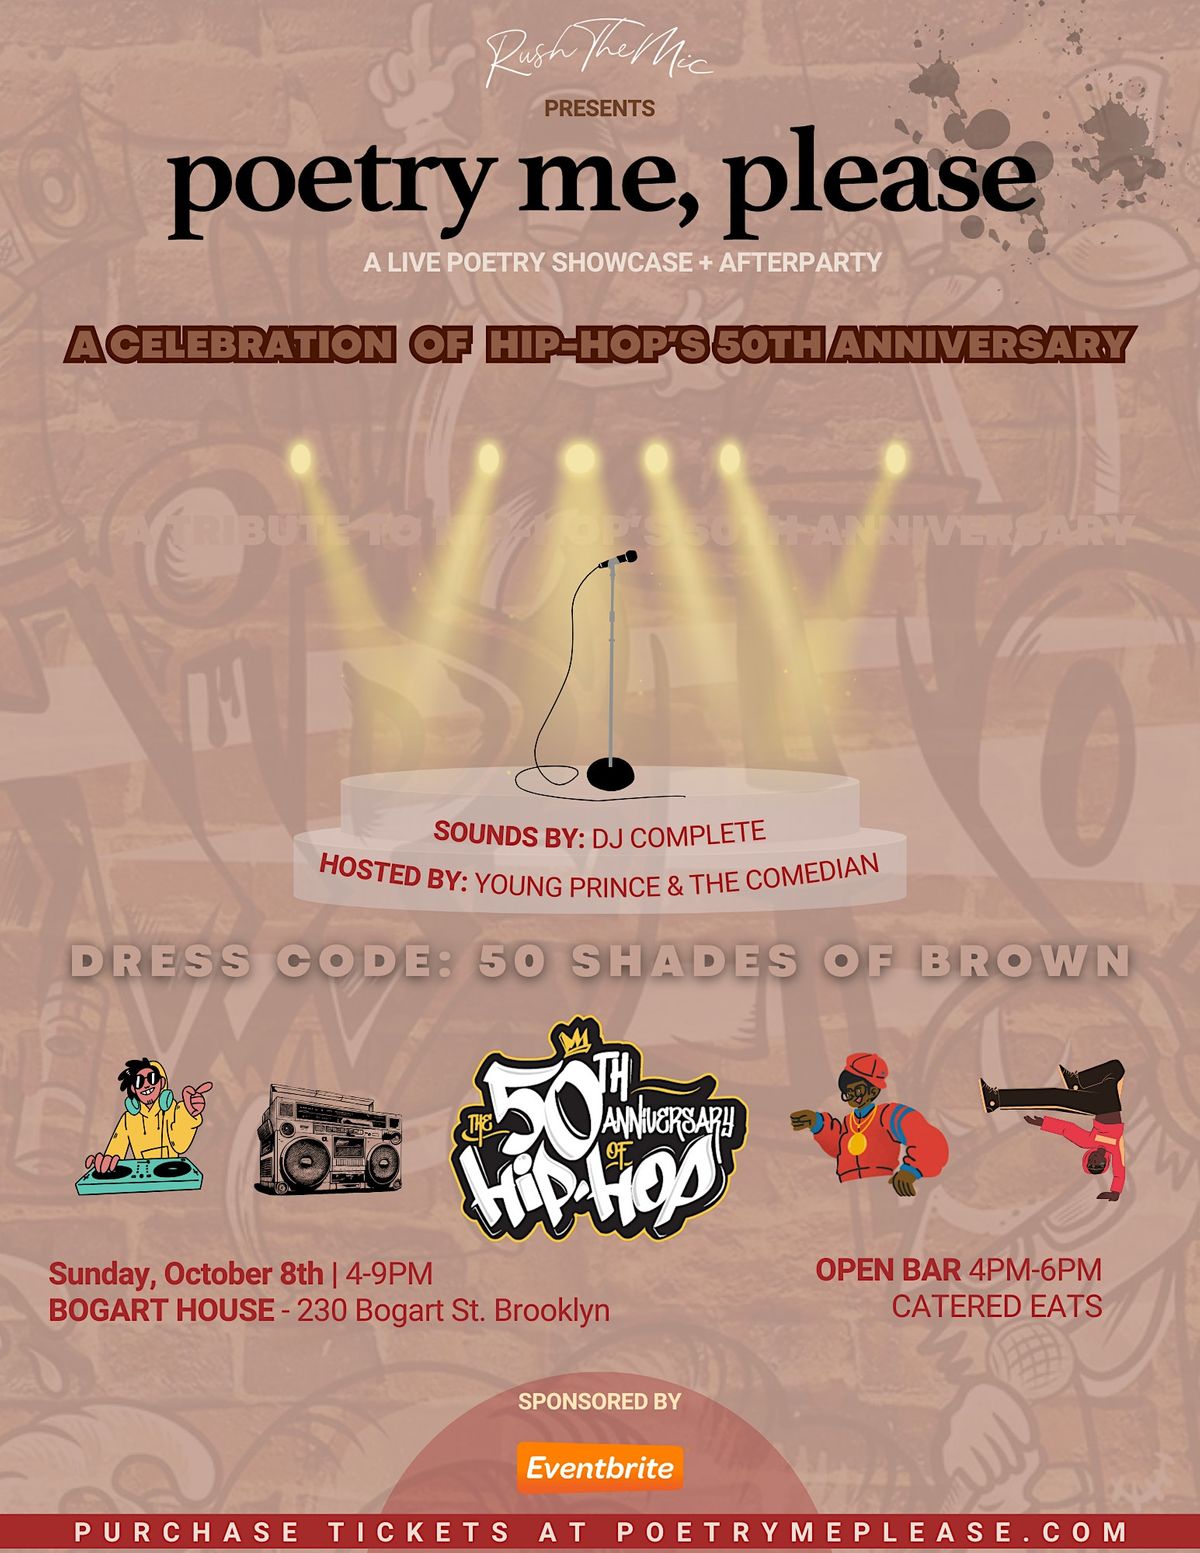 poetry me, please: A Celebration of Hip-Hop's 50th